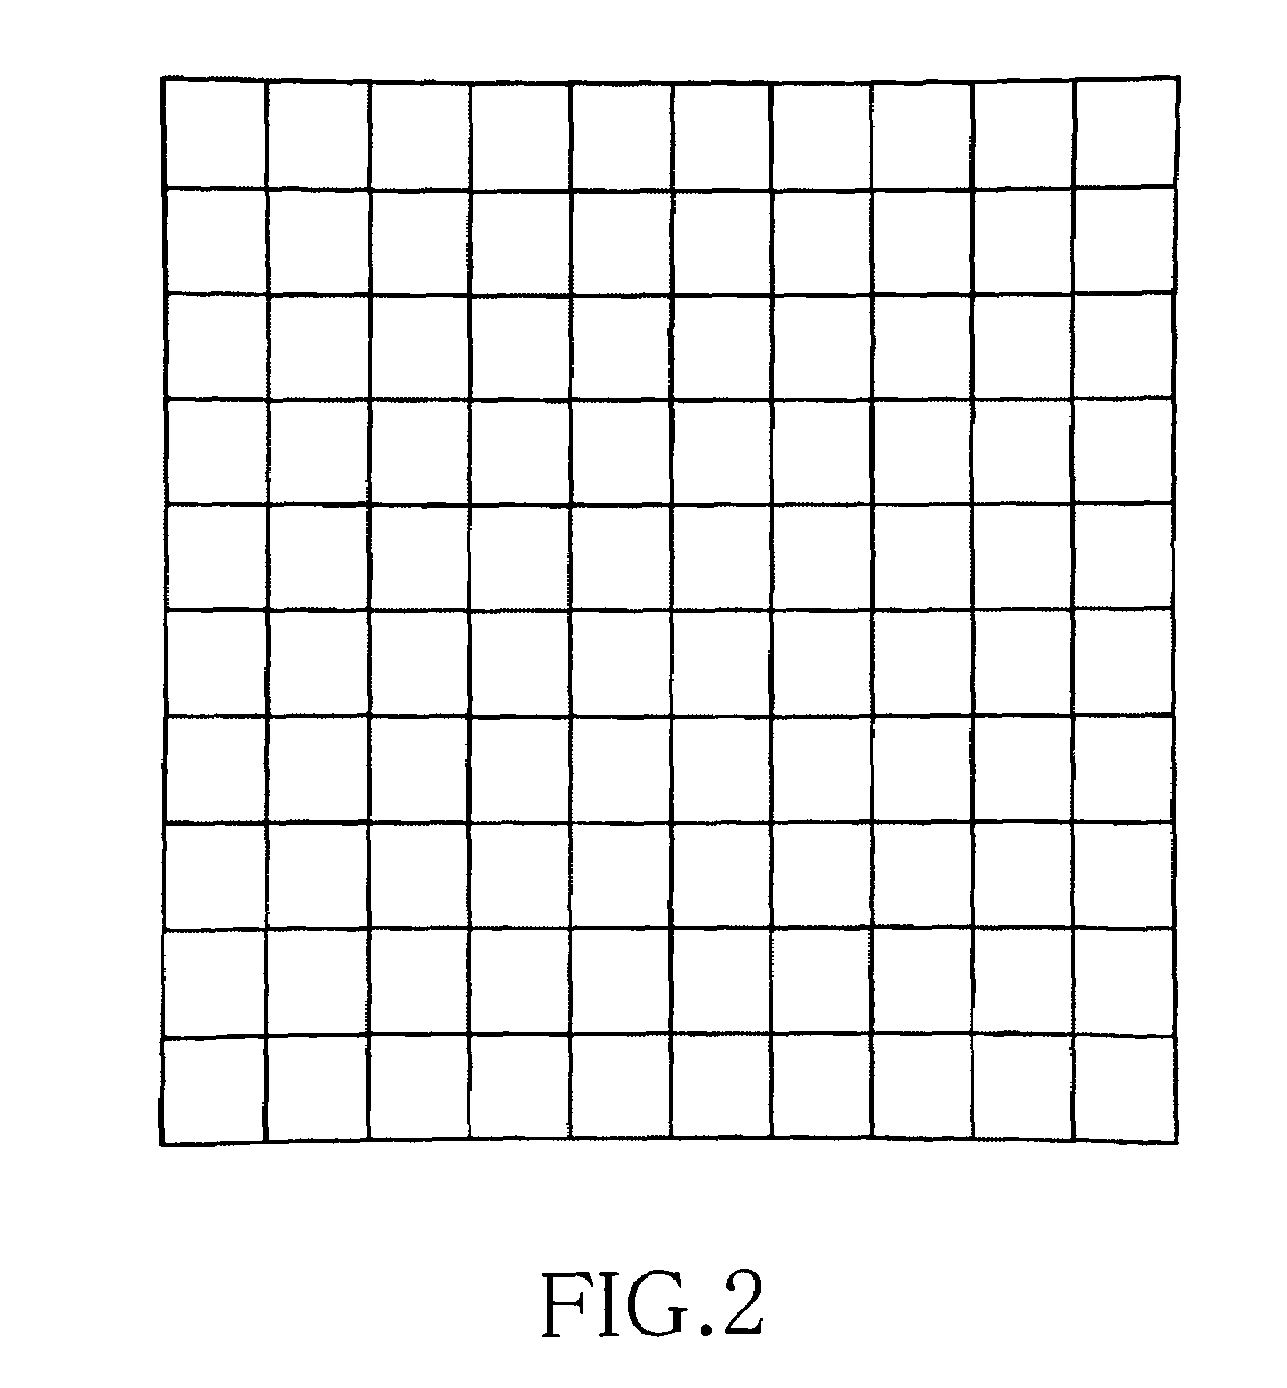 Image-formation optical system and optical apparatus